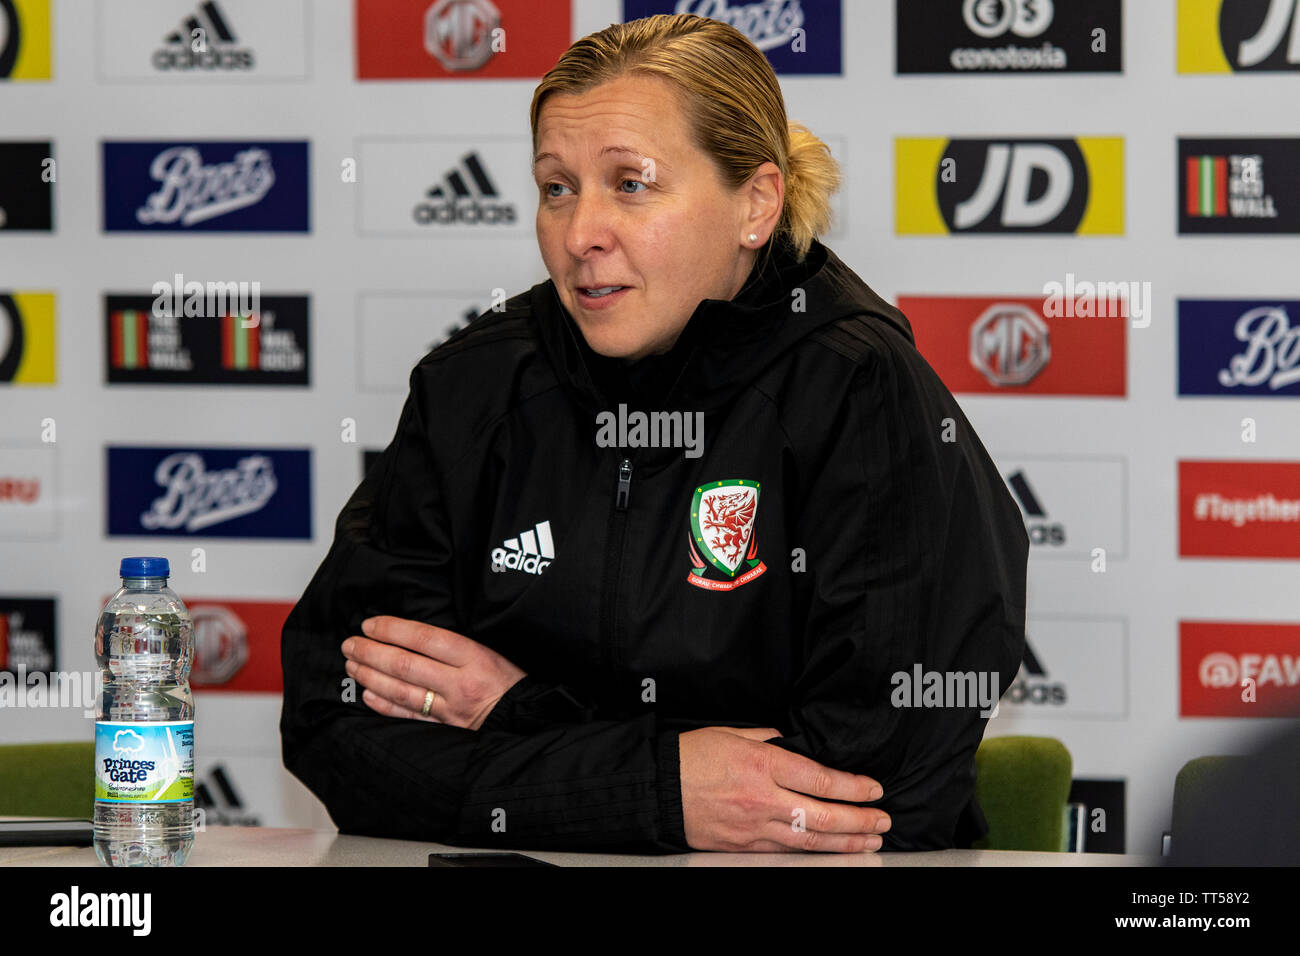 Jayne Ludlow faces the media after the Wales Women v New Zealand international match at Leckwith Stadium. Lewis Mitchell/YCPD. Stock Photo